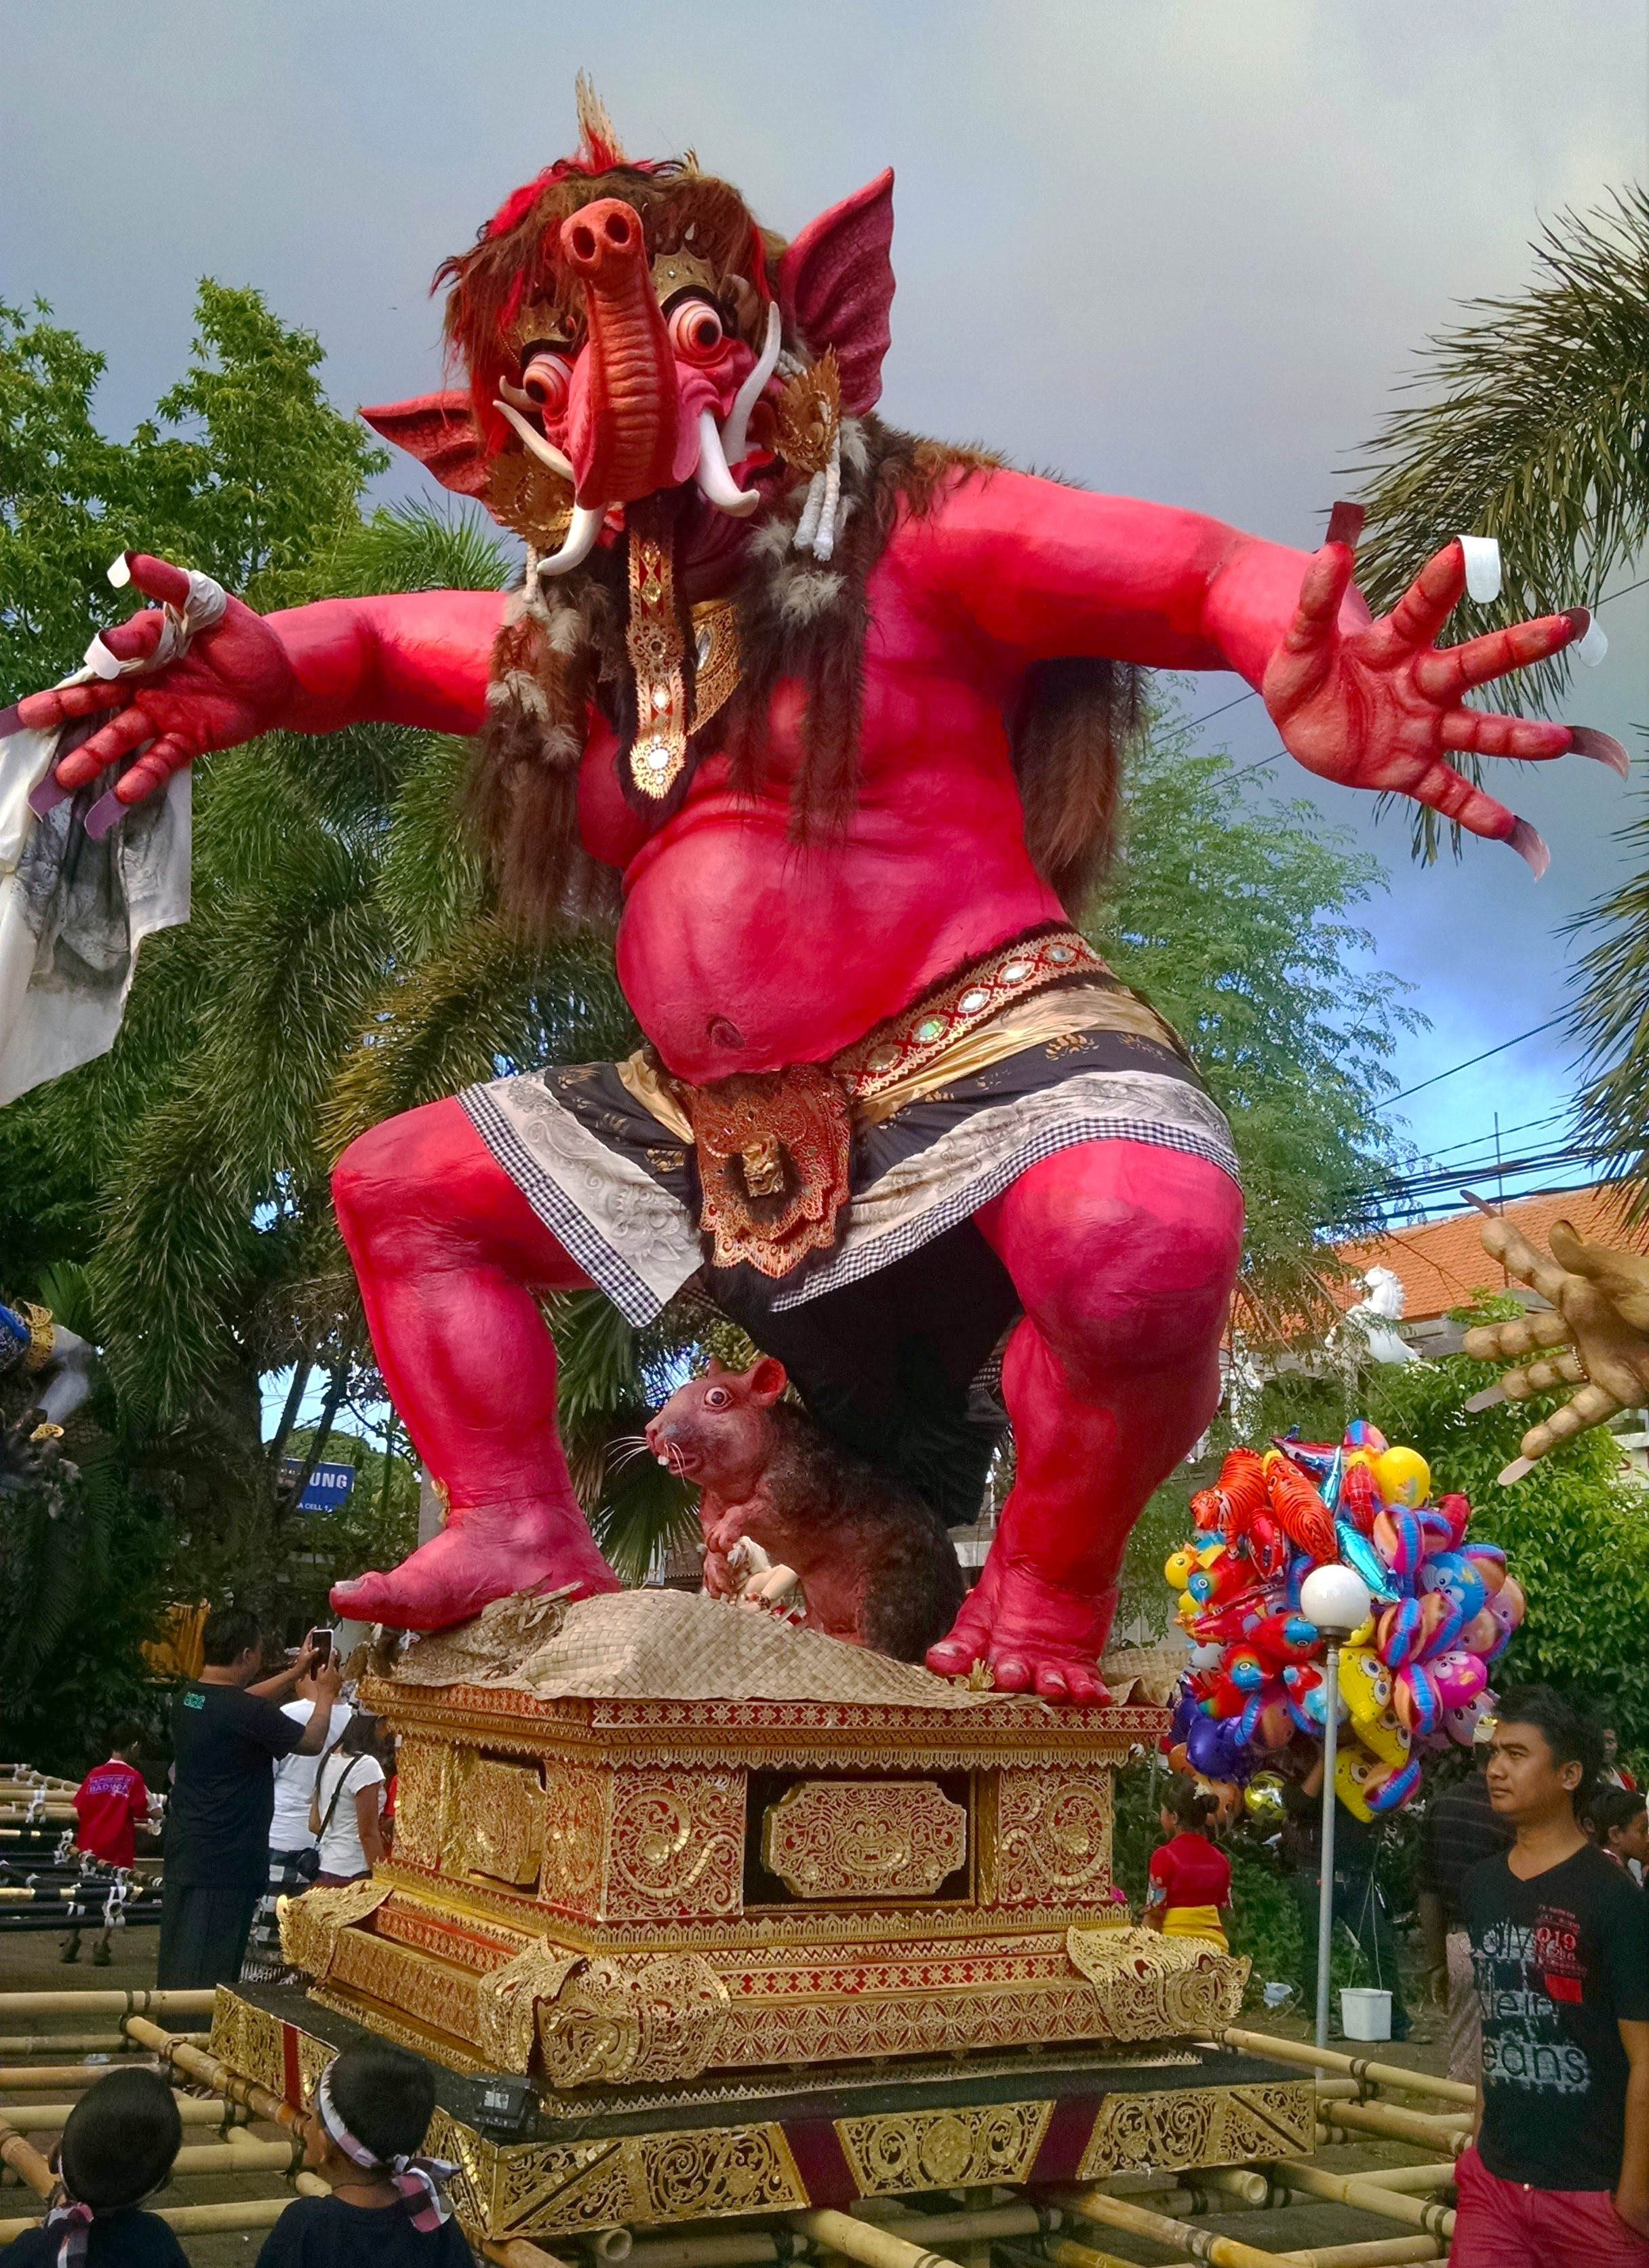 PacRim students in March 2015 stumbled onto an Ngrupuk parade in Ubud, Bali, Indonesia. The parades feature huge ogoh-ogoh statues, ”made with papier-mâché and lots of paint,“ says faculty member Gareth Barkin, who was on the trip.